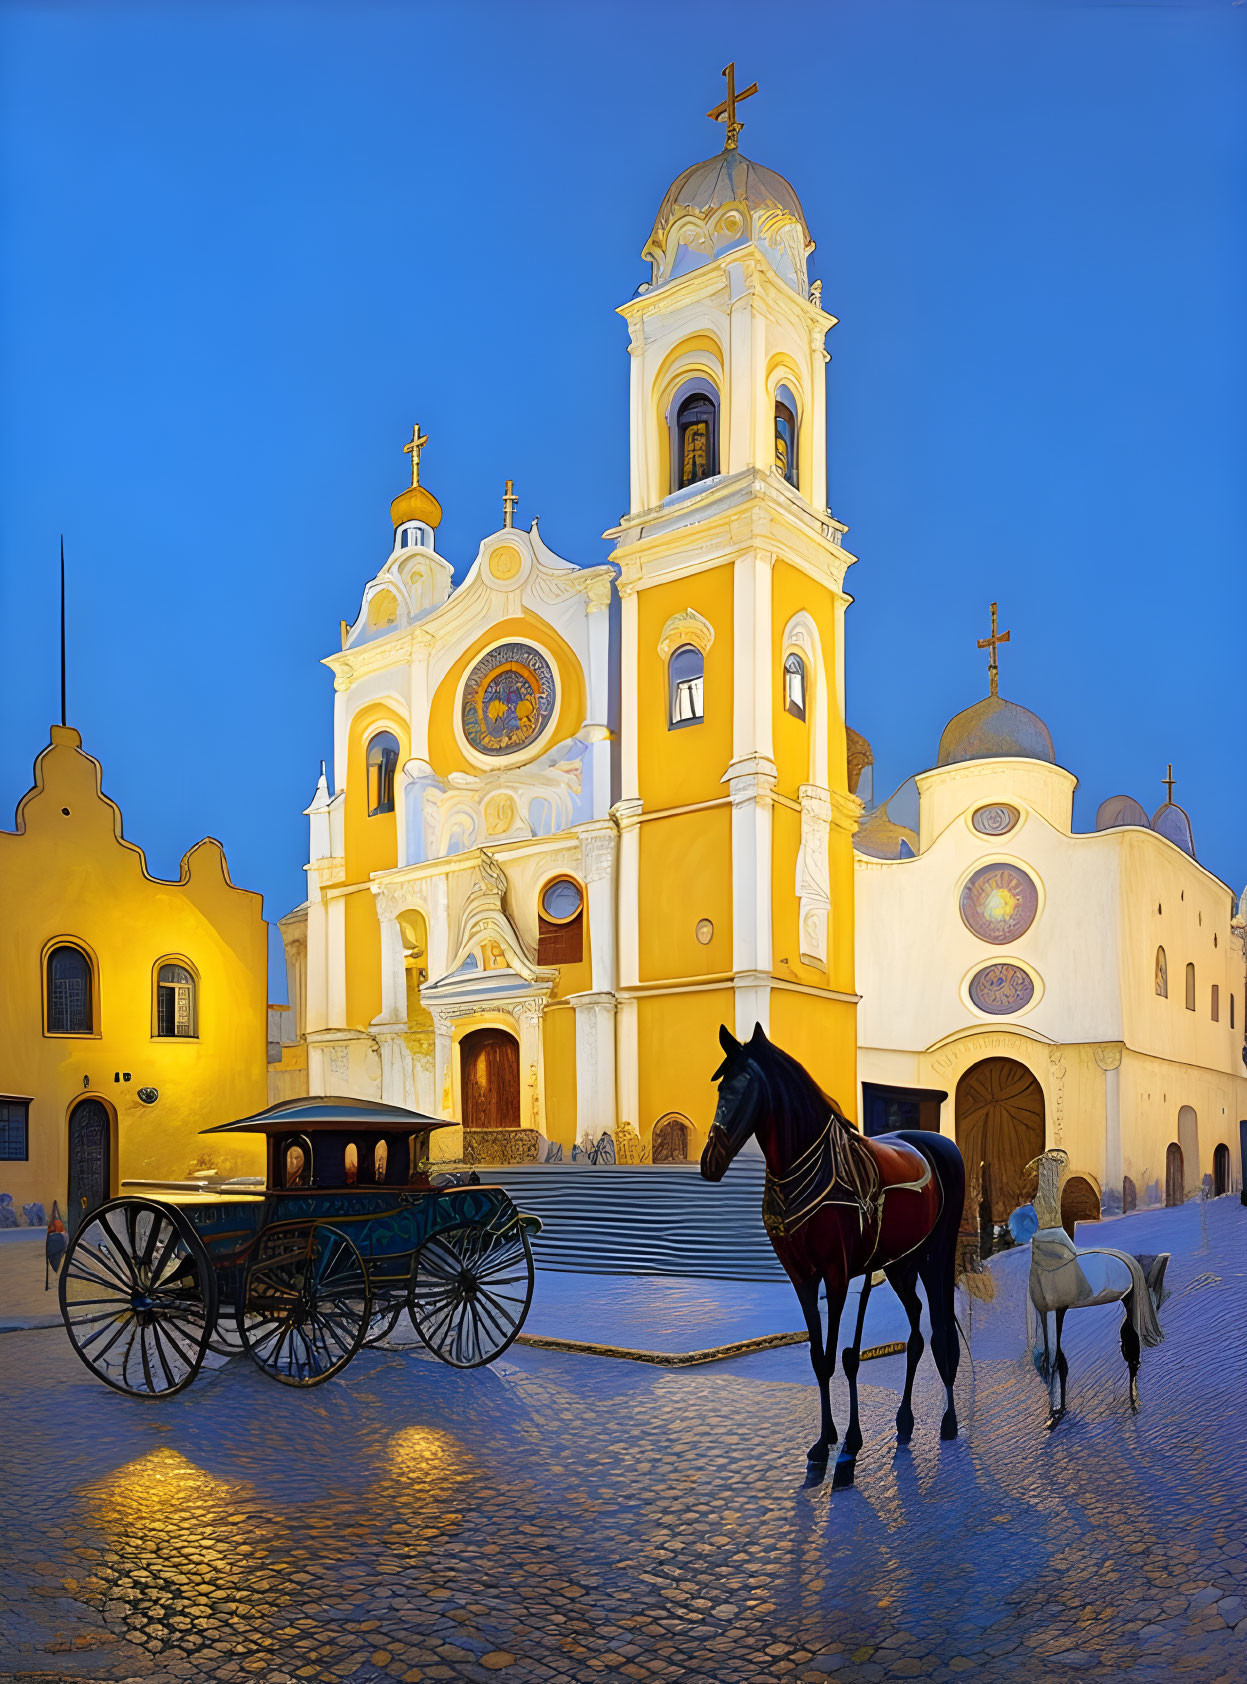 Colonial church with twin bell towers and horse-drawn carriage at twilight